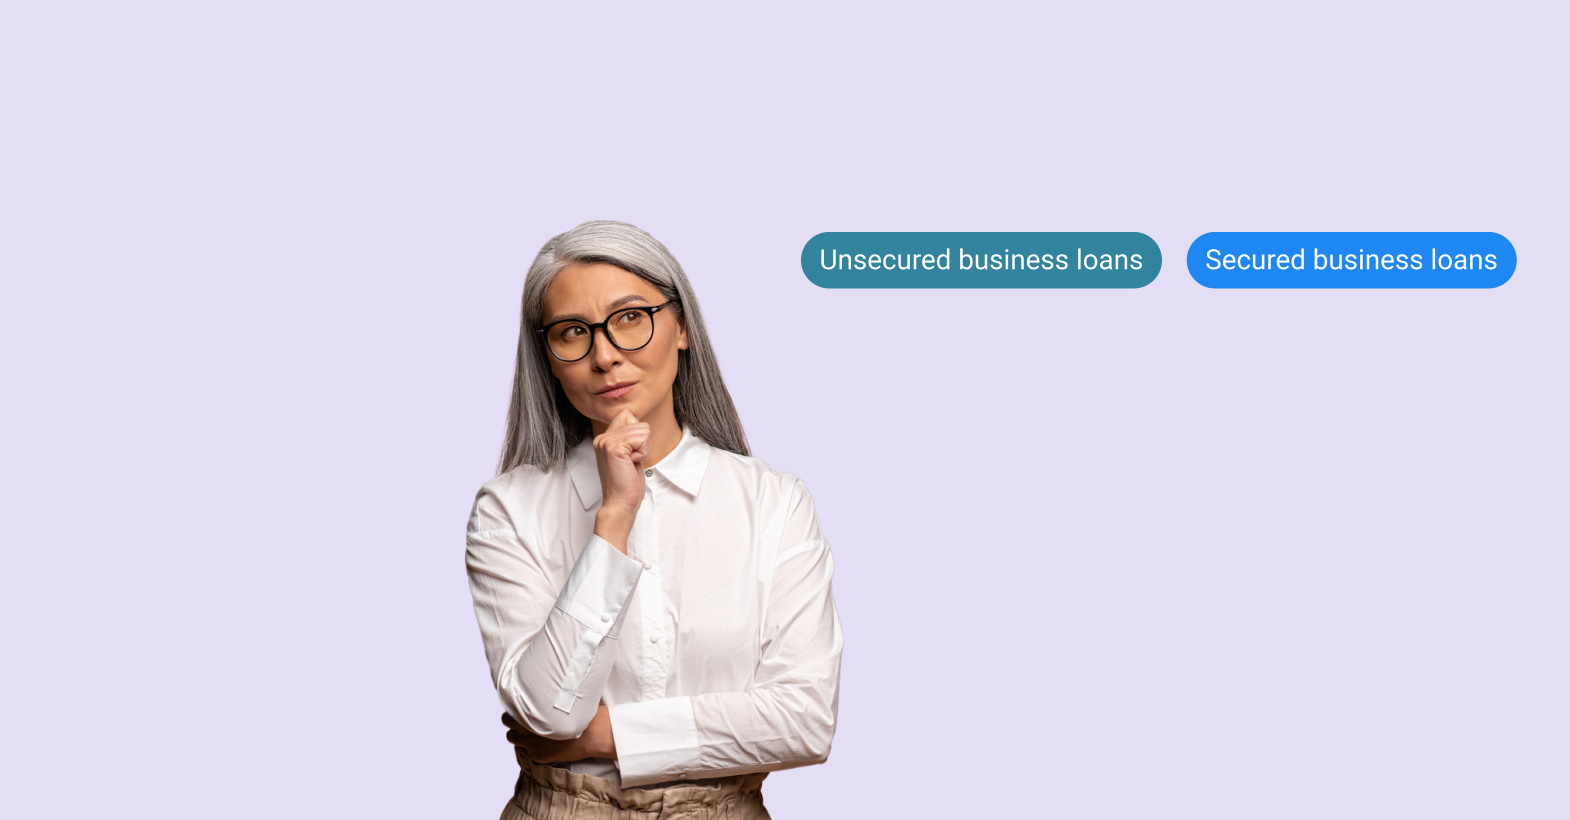 Unsecured business loans vs. secured business loans by Capitalise image